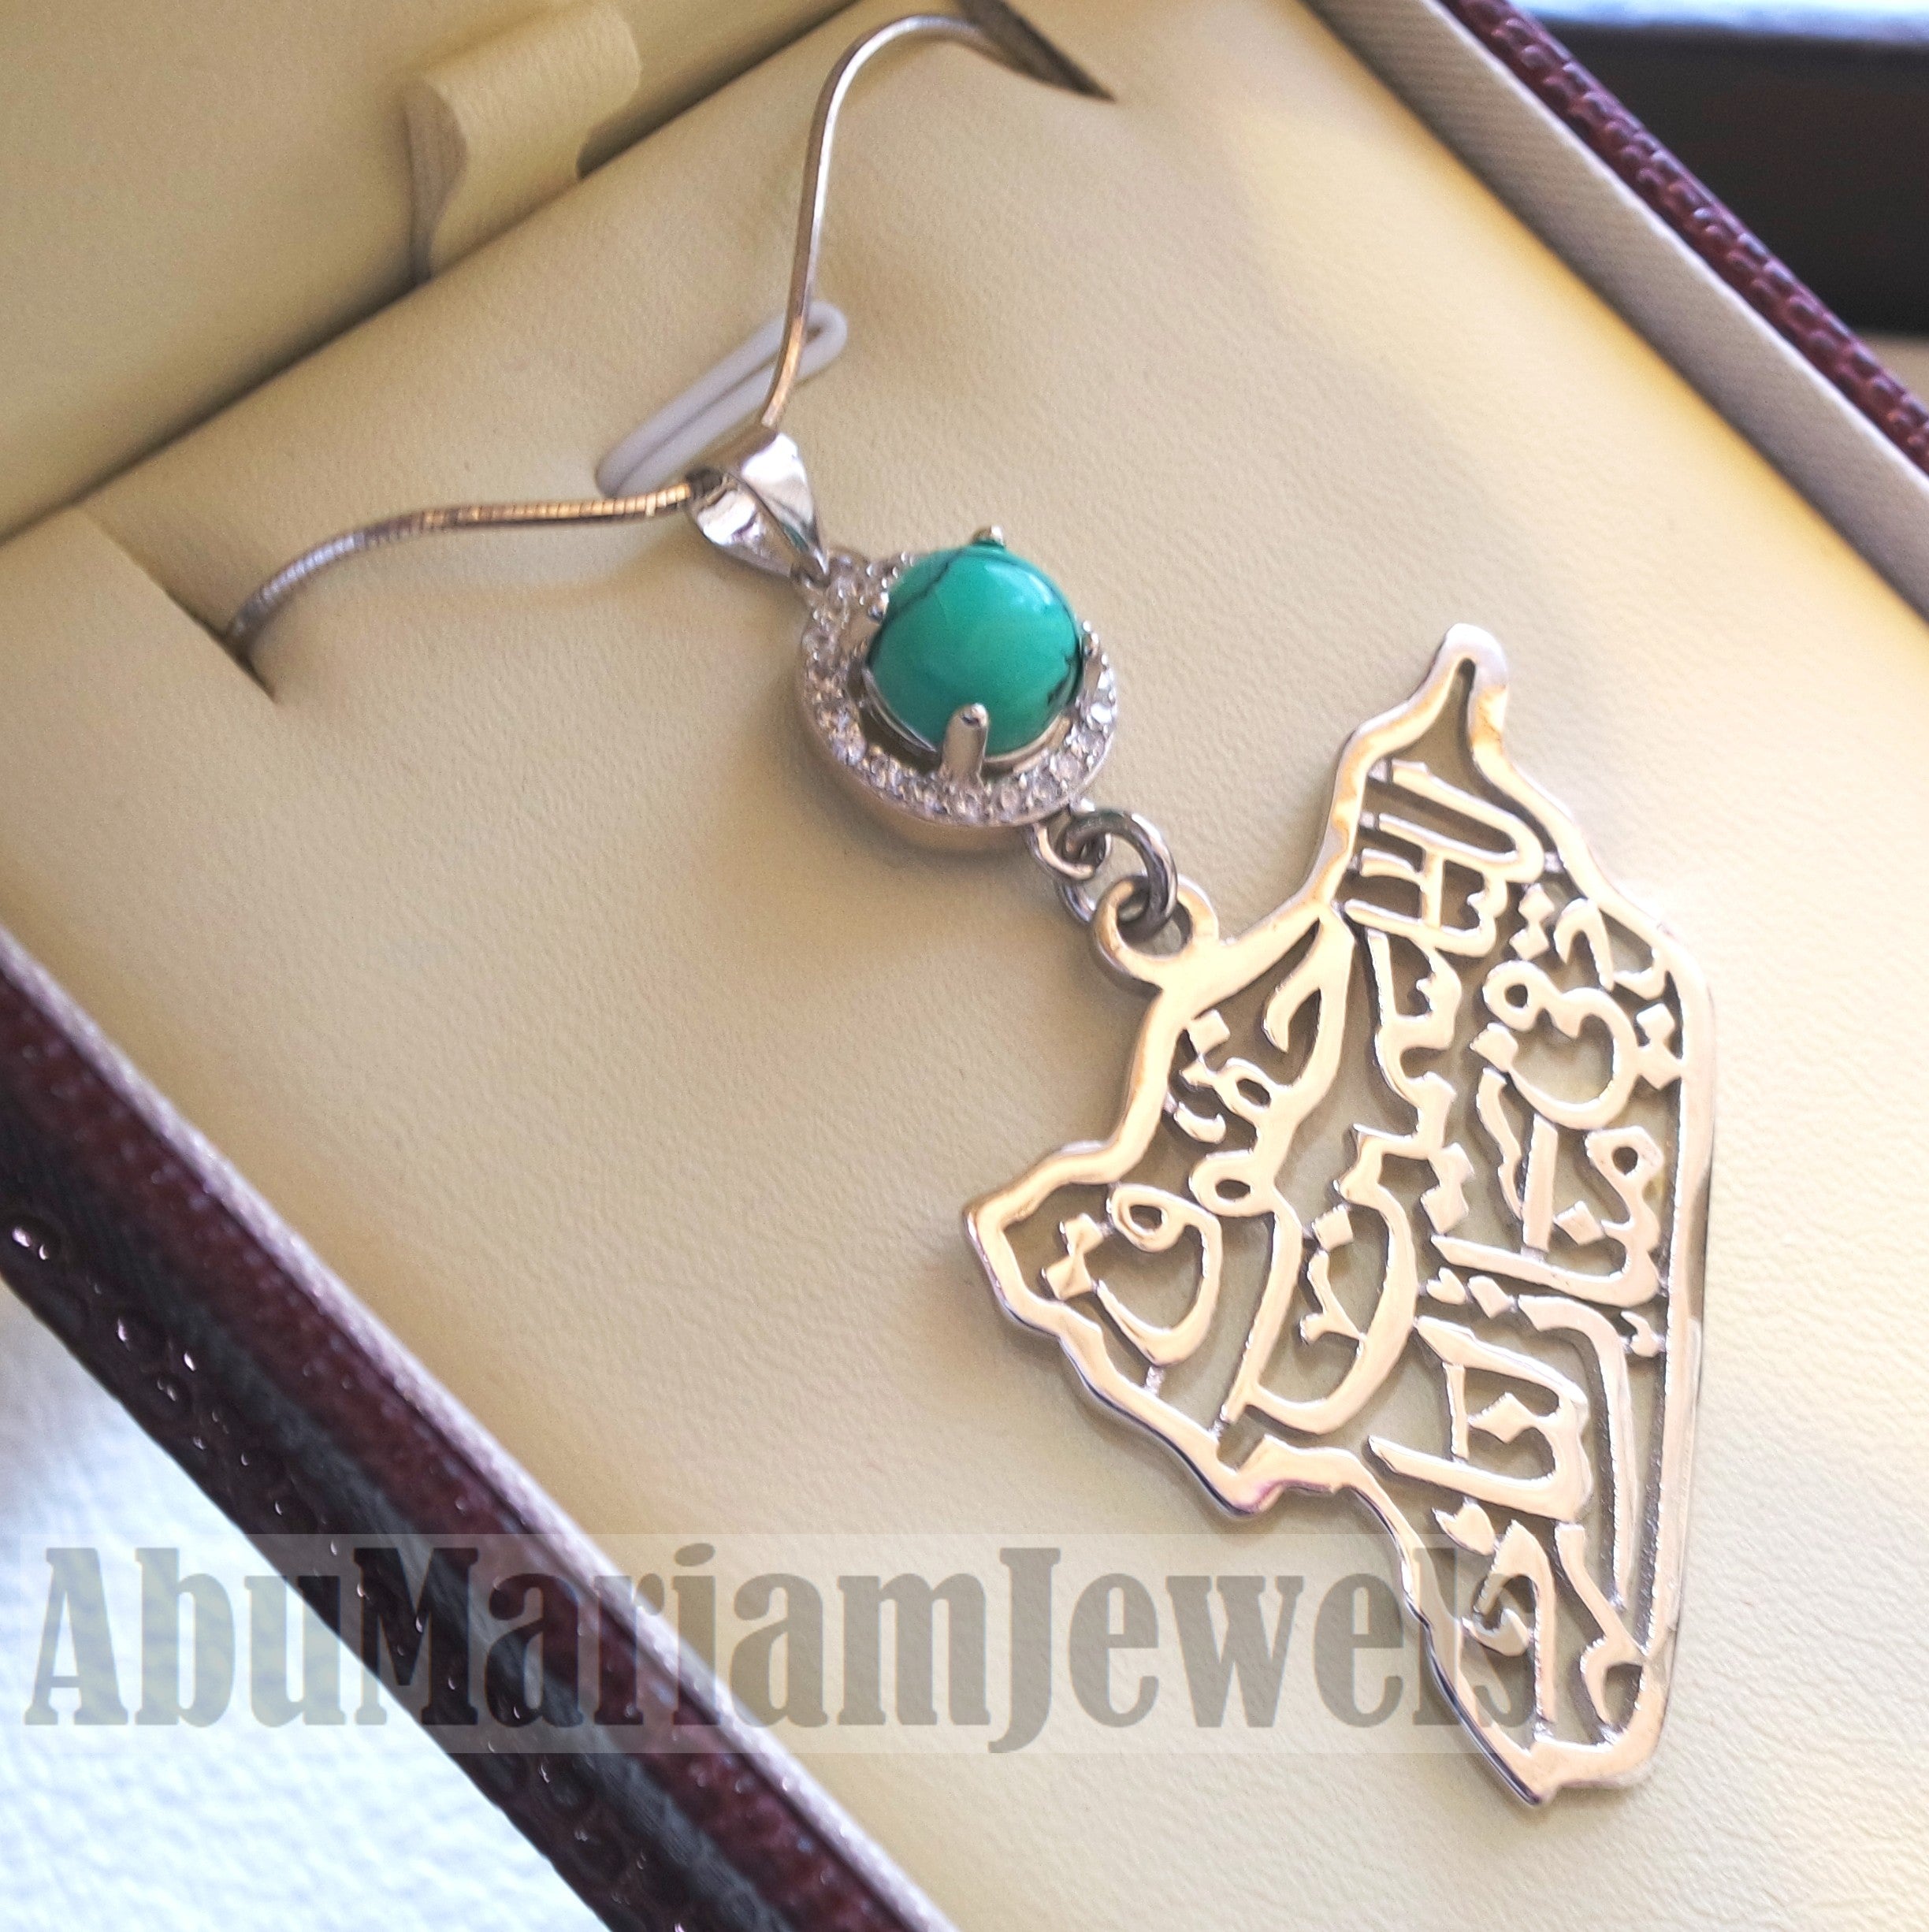 Syria map pendant with famous poem verse sterling silver 925 k and natural turquoise jewelry arabic fast shipping خارطه سوريا